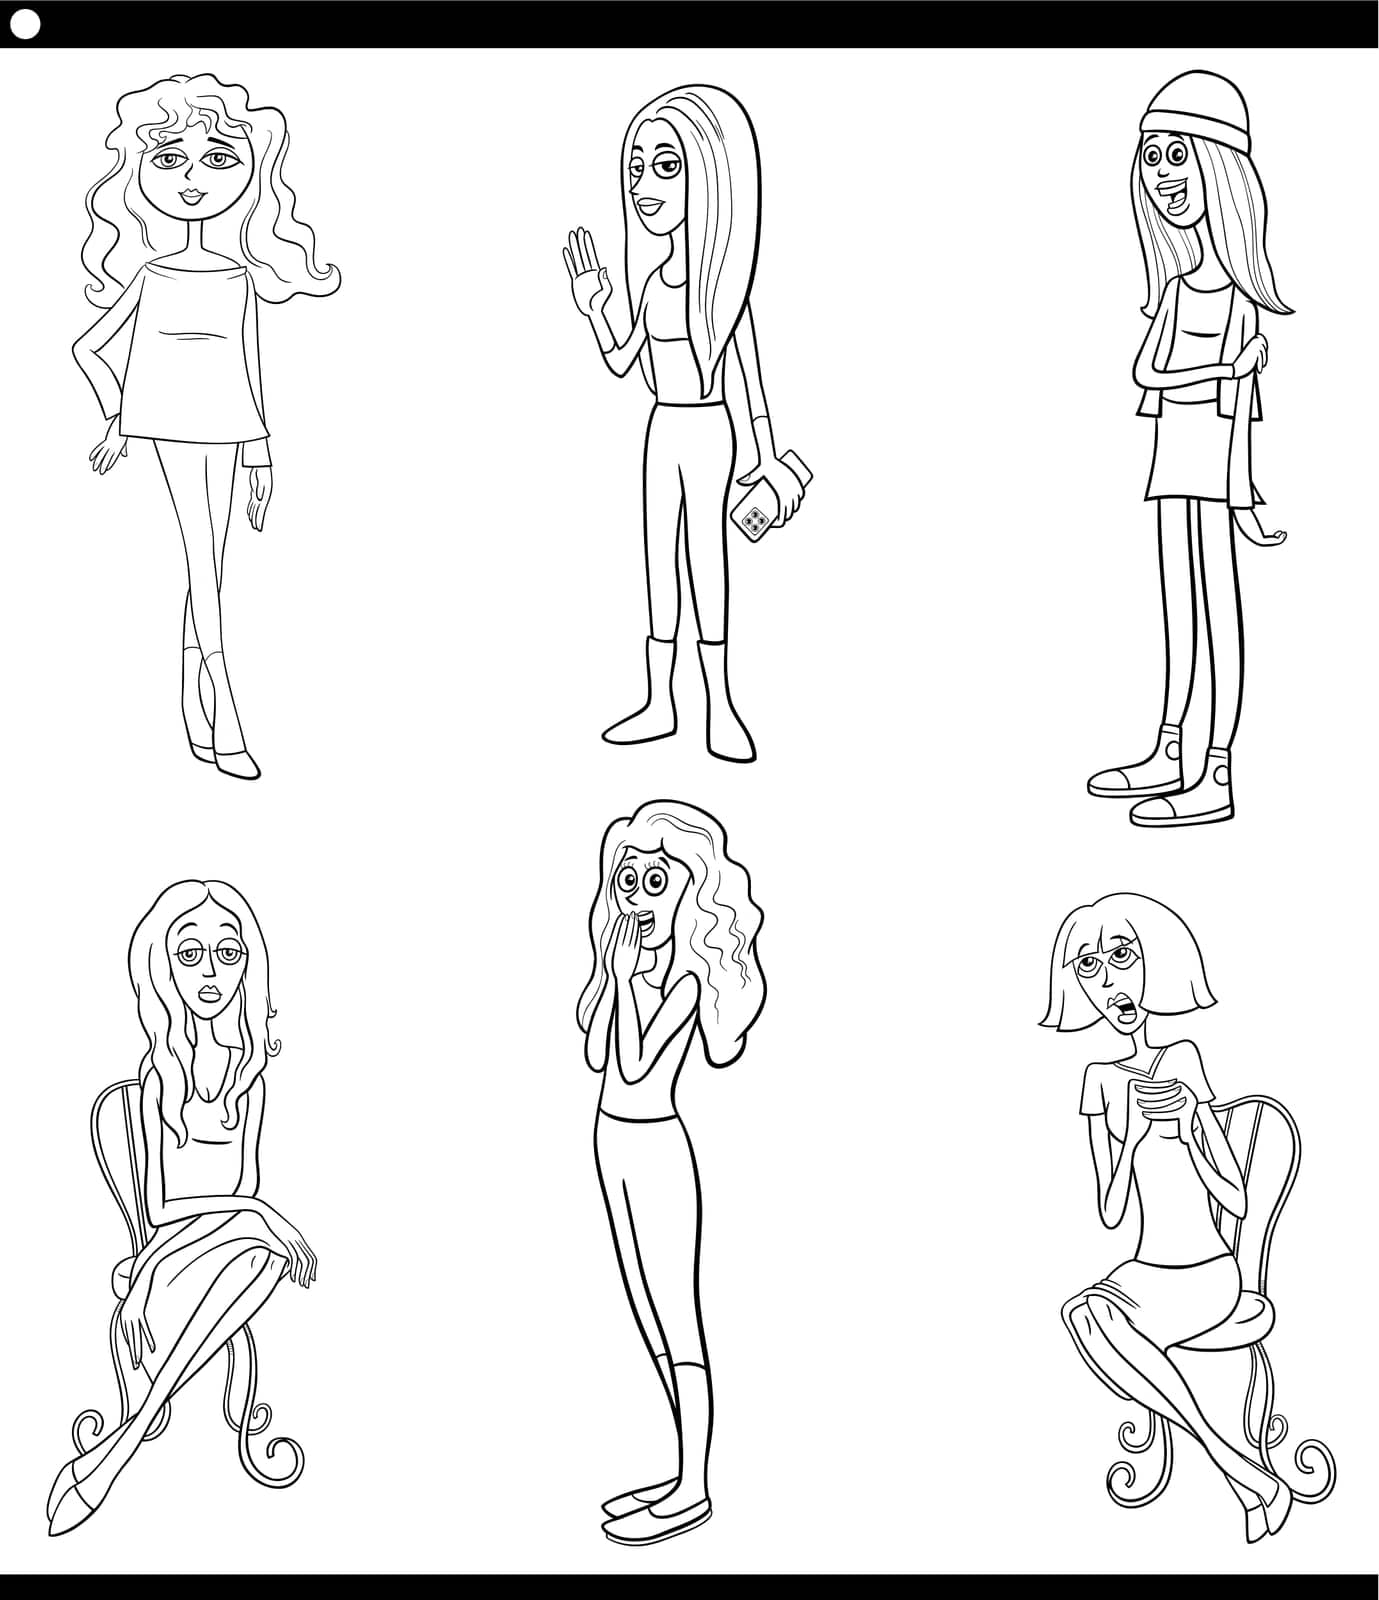 Black and white cartoon illustration of funny young women characters caricature set coloring page